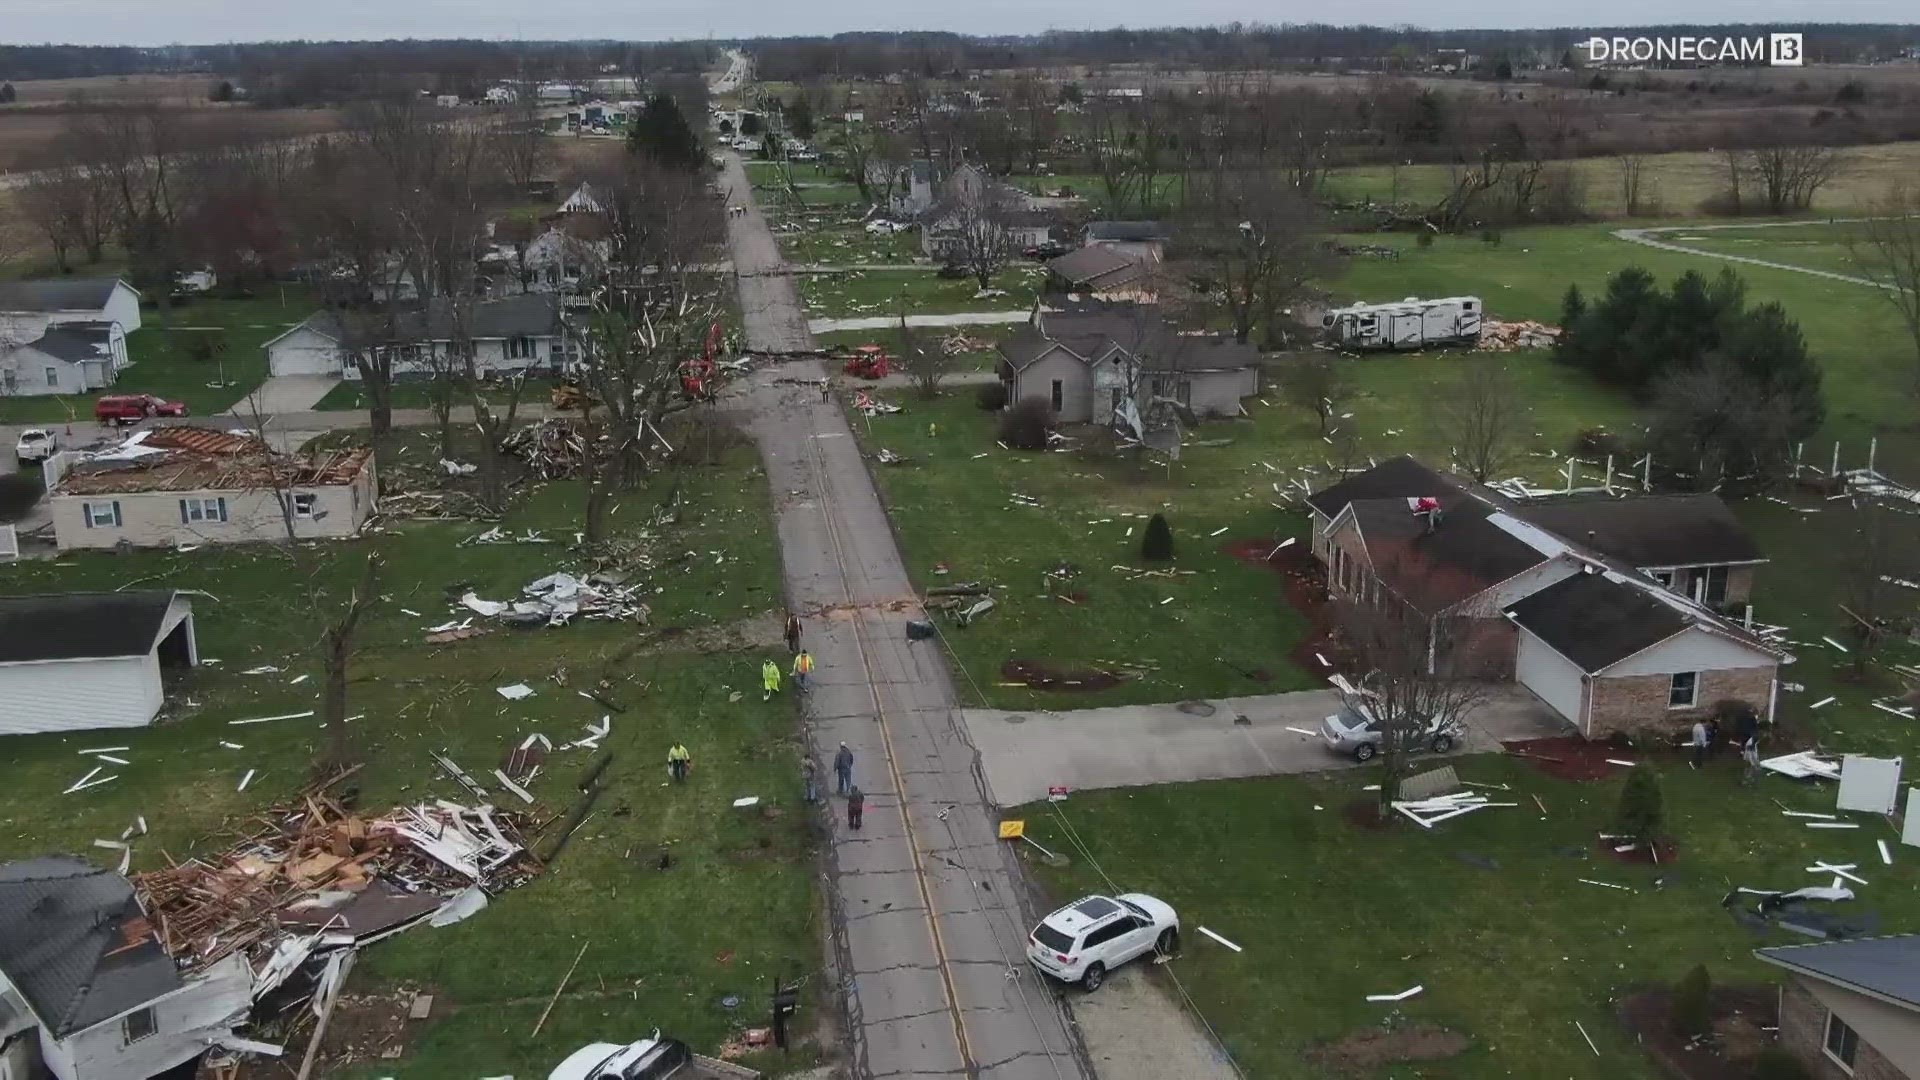 A line of strong storms moved through central Indiana Thursday evening, with possible tornadoes causing extensive damage in parts of Delaware and Randolph counties.